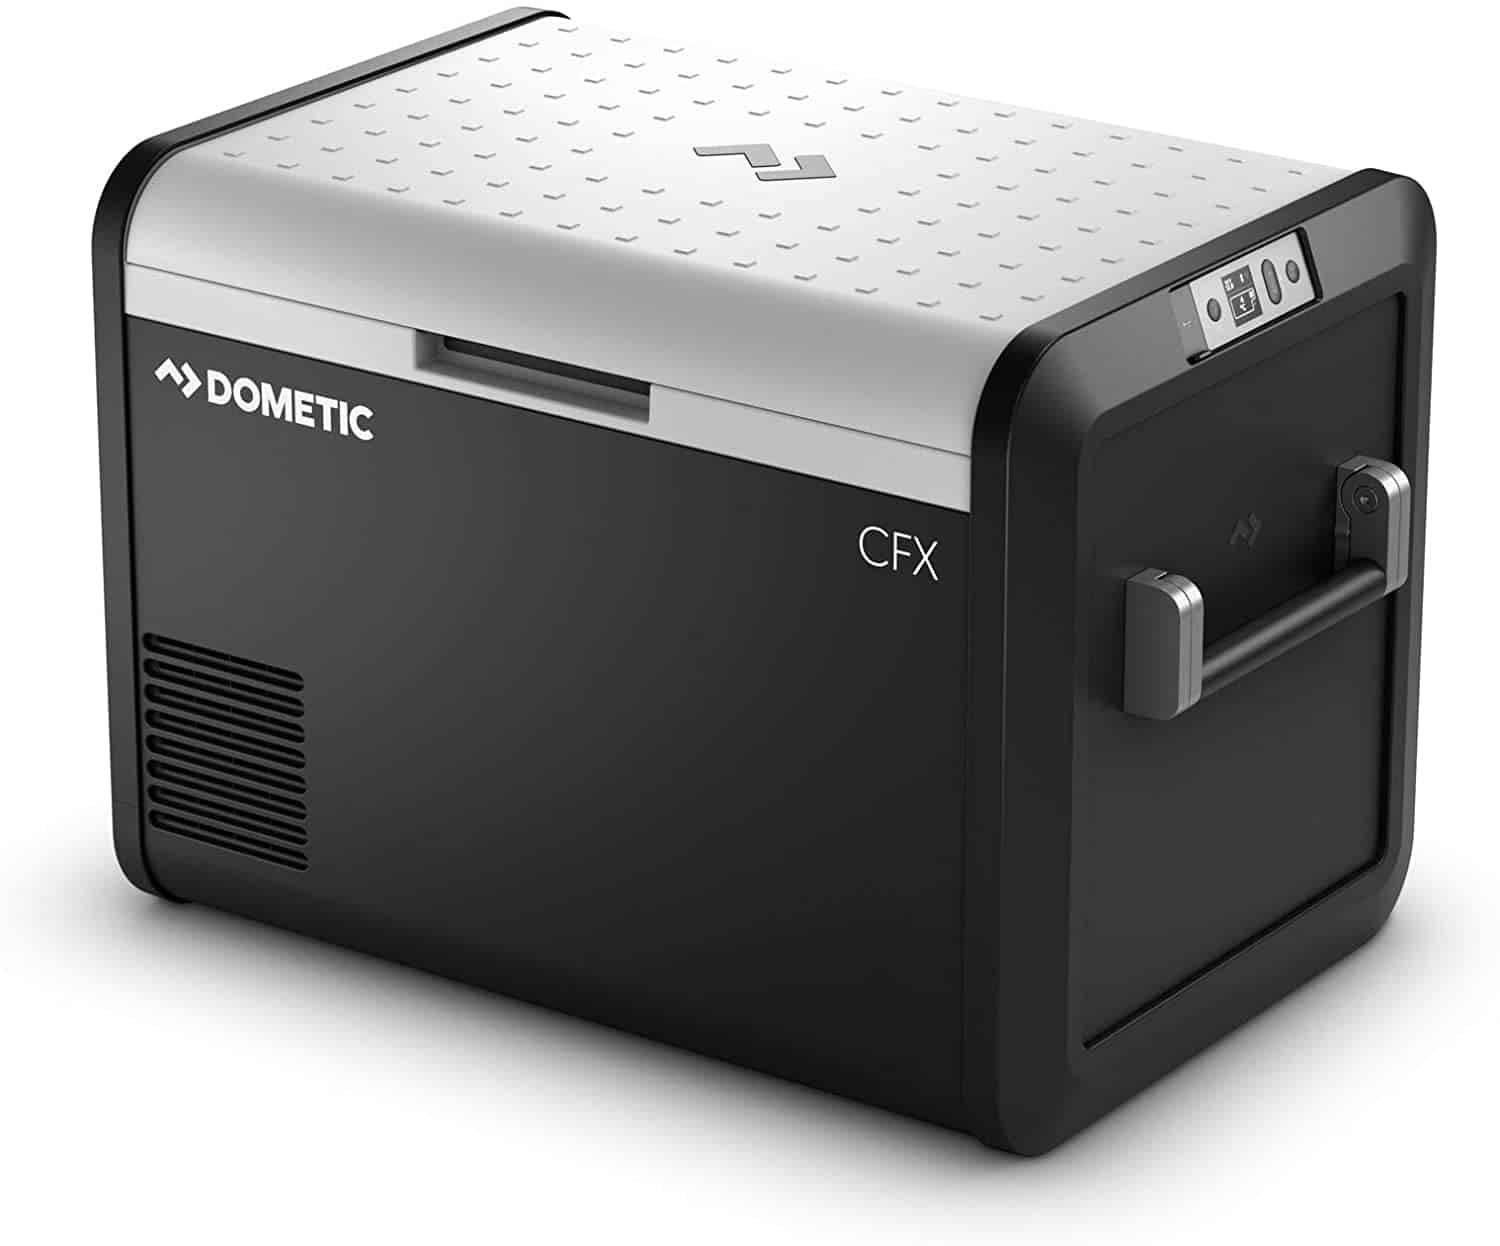 Dometic CFX3 55IM review